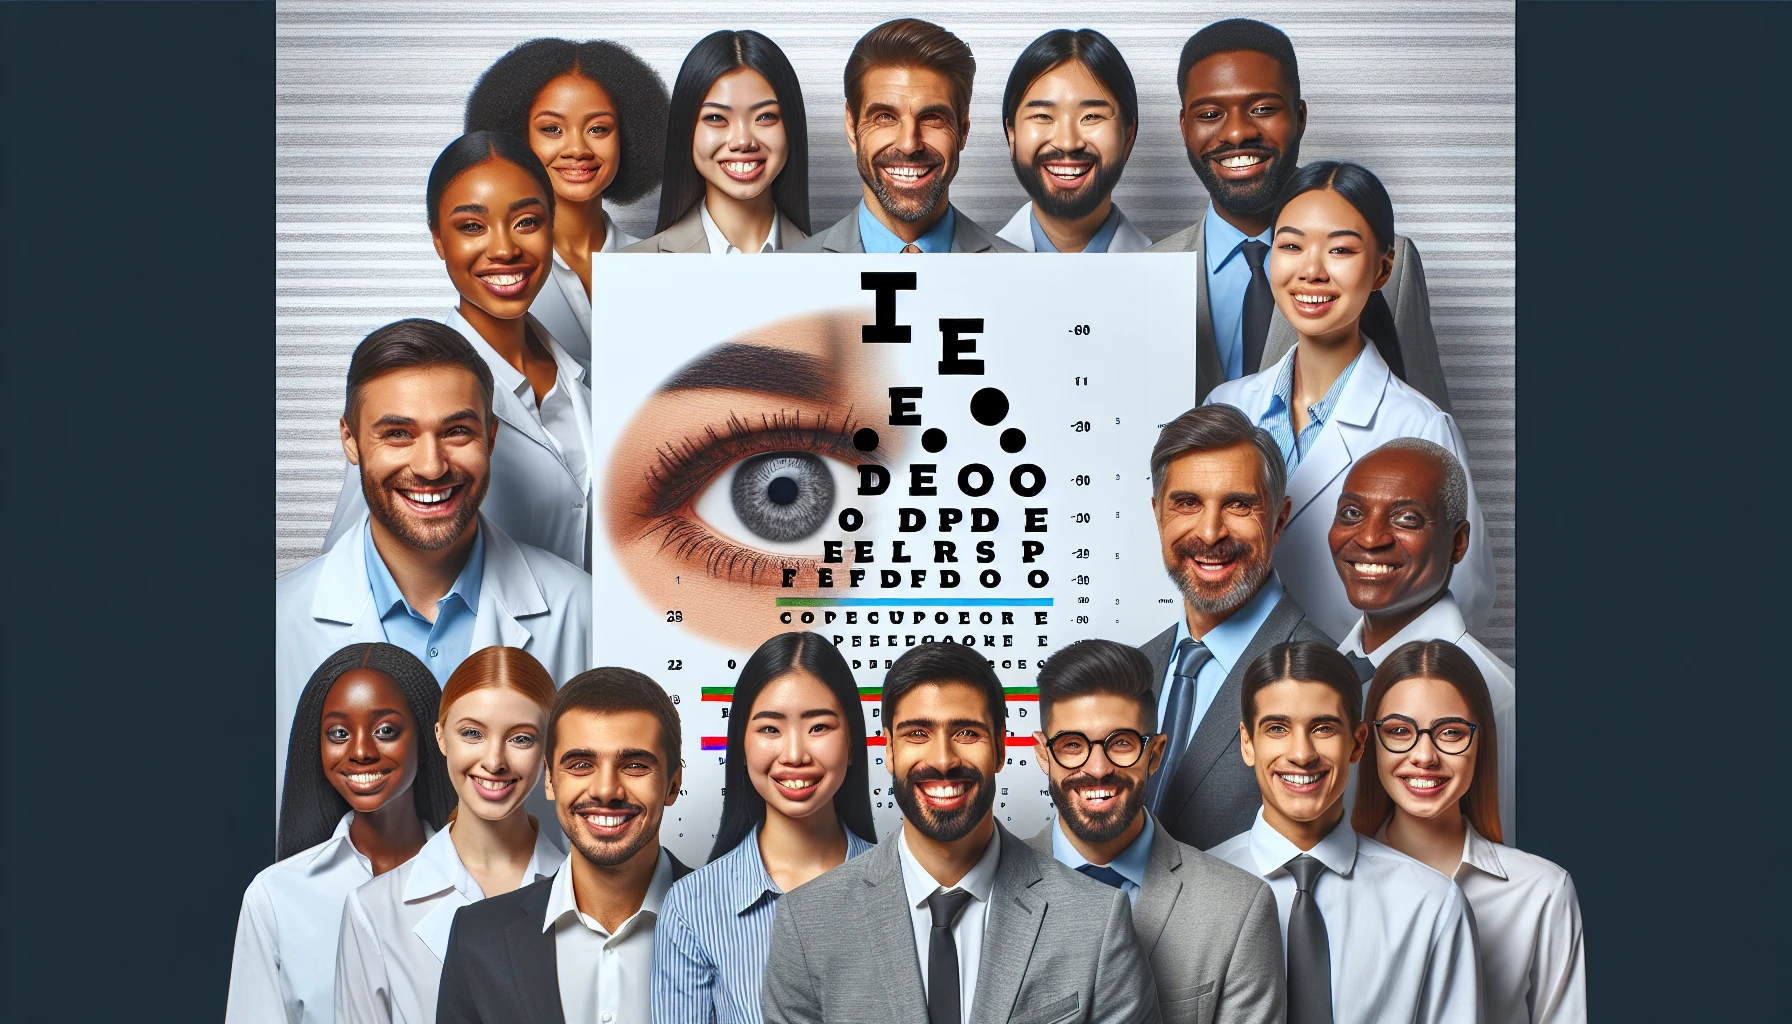 Importance of dental and vision coverage in employee benefit packages